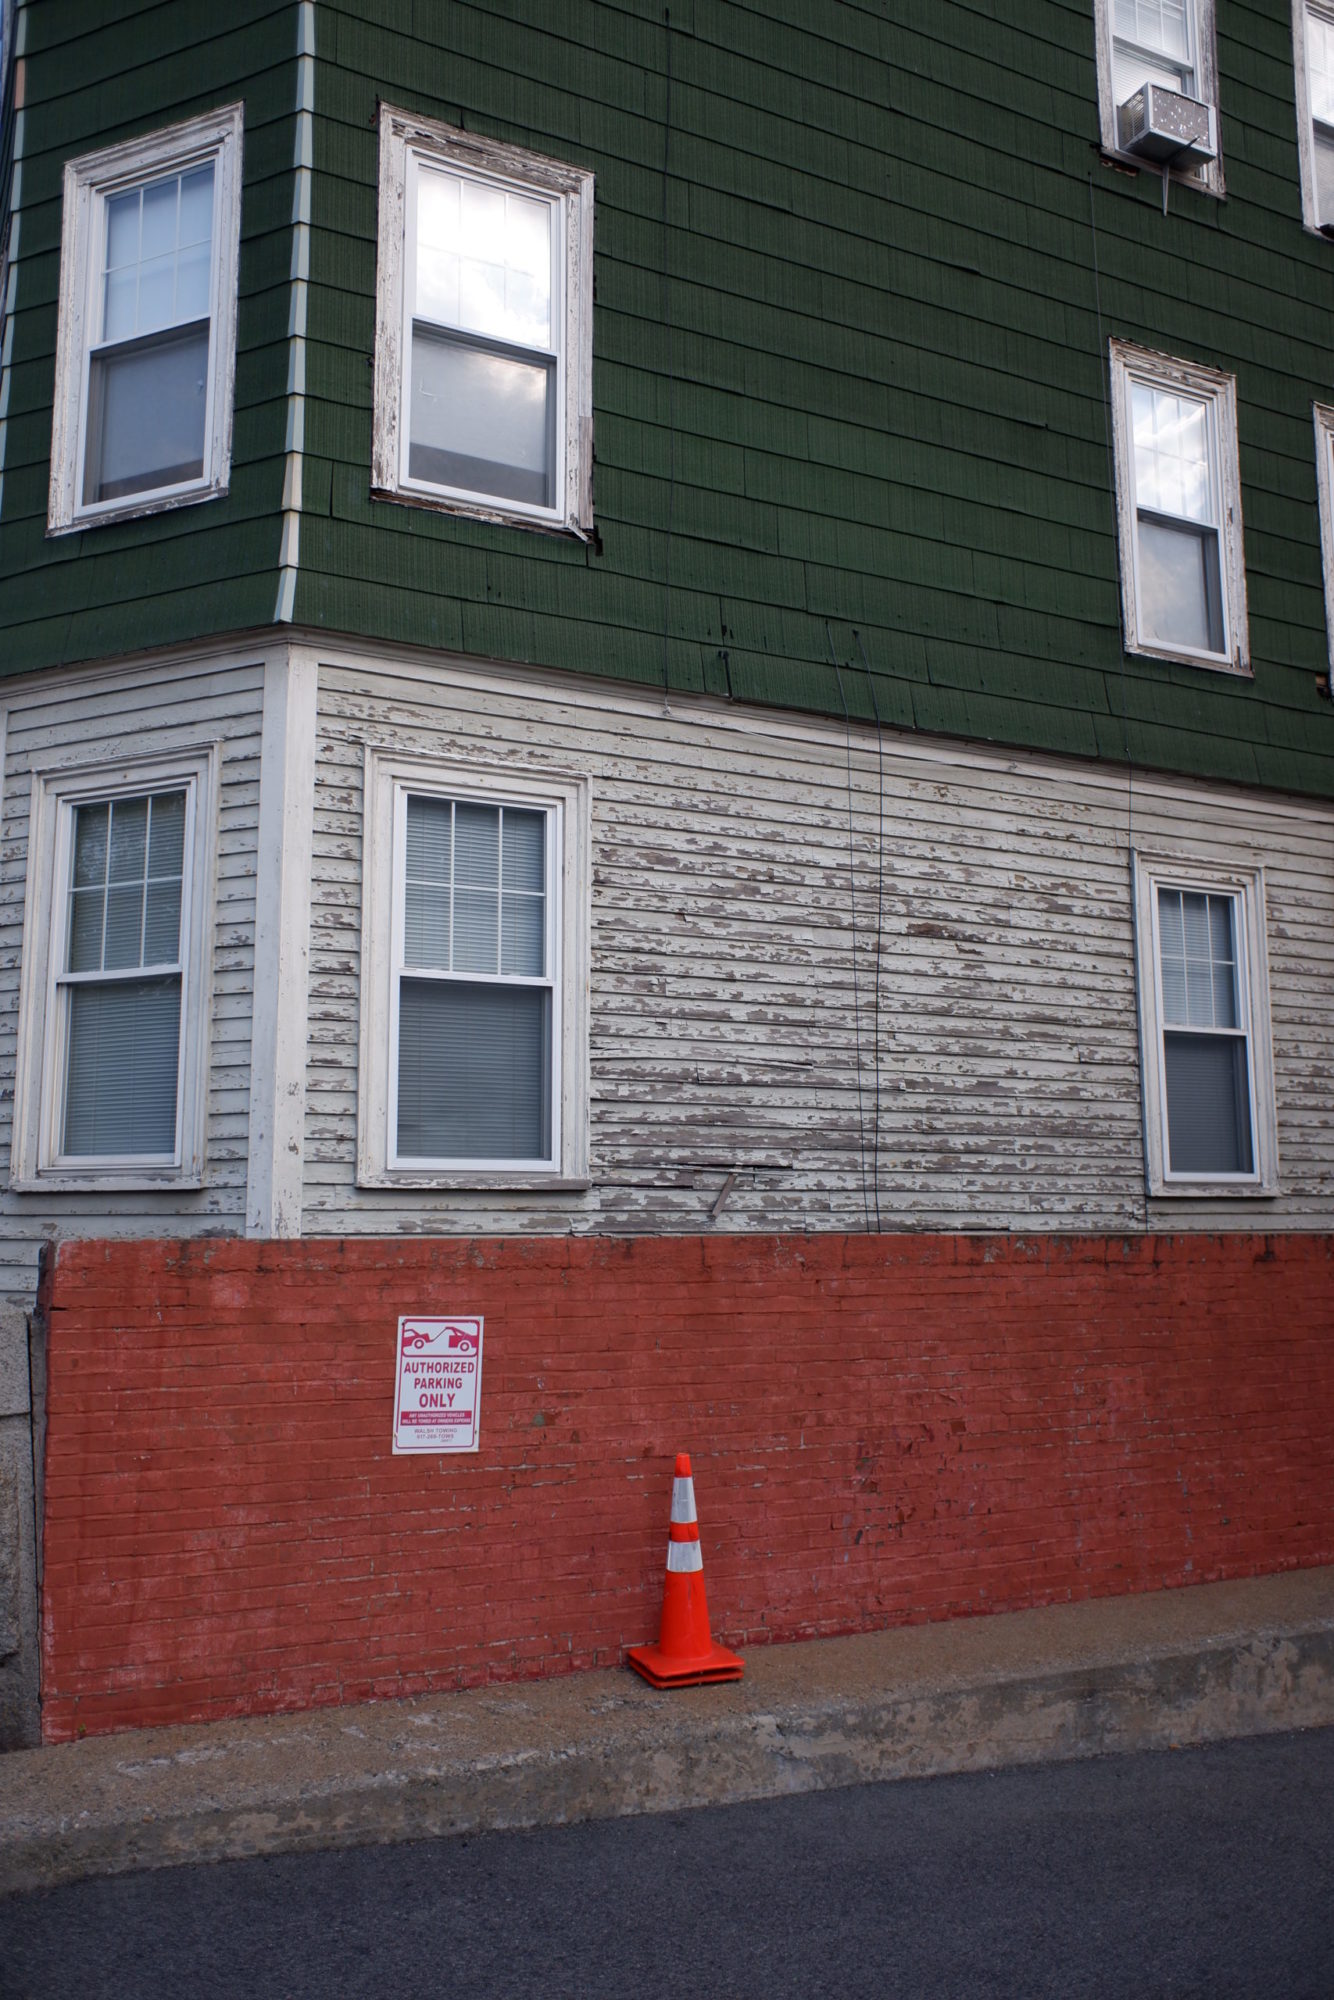 A closer shot of the side of a building. The bottom floor has a red brick wall against it. The second floor is older white wood. Stories above are dark green. Multiple windows are visible, one of which has an air conditioning unit in it. There is an orange cone on the sidewalk.